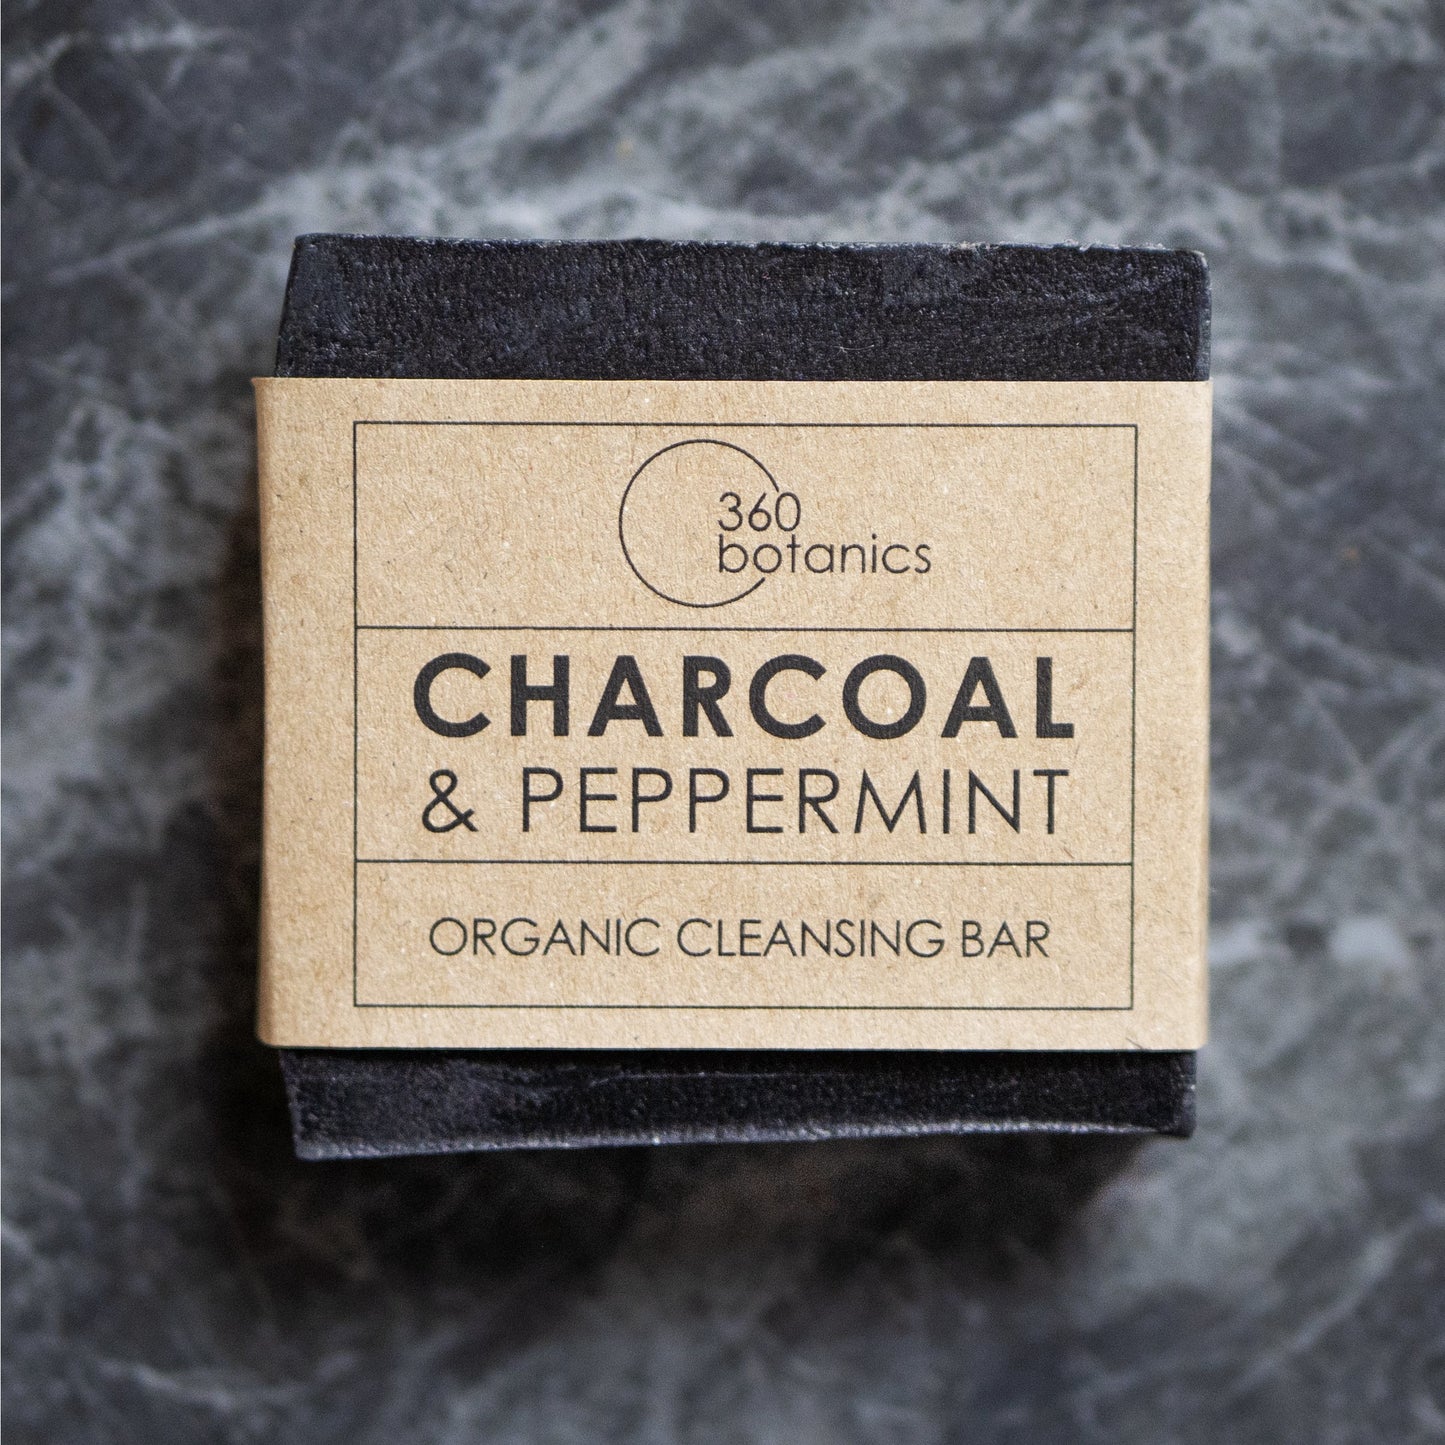 Close-up view of a 360 Botanics organic cleansing bar packaging, featuring 'CHARCOAL & PEPPERMINT' on a natural kraft paper label. The black bar of soap is partially visible, suggesting the product's natural charcoal ingredient, all set against a grey marbled background, evoking a clean and organic aesthetic